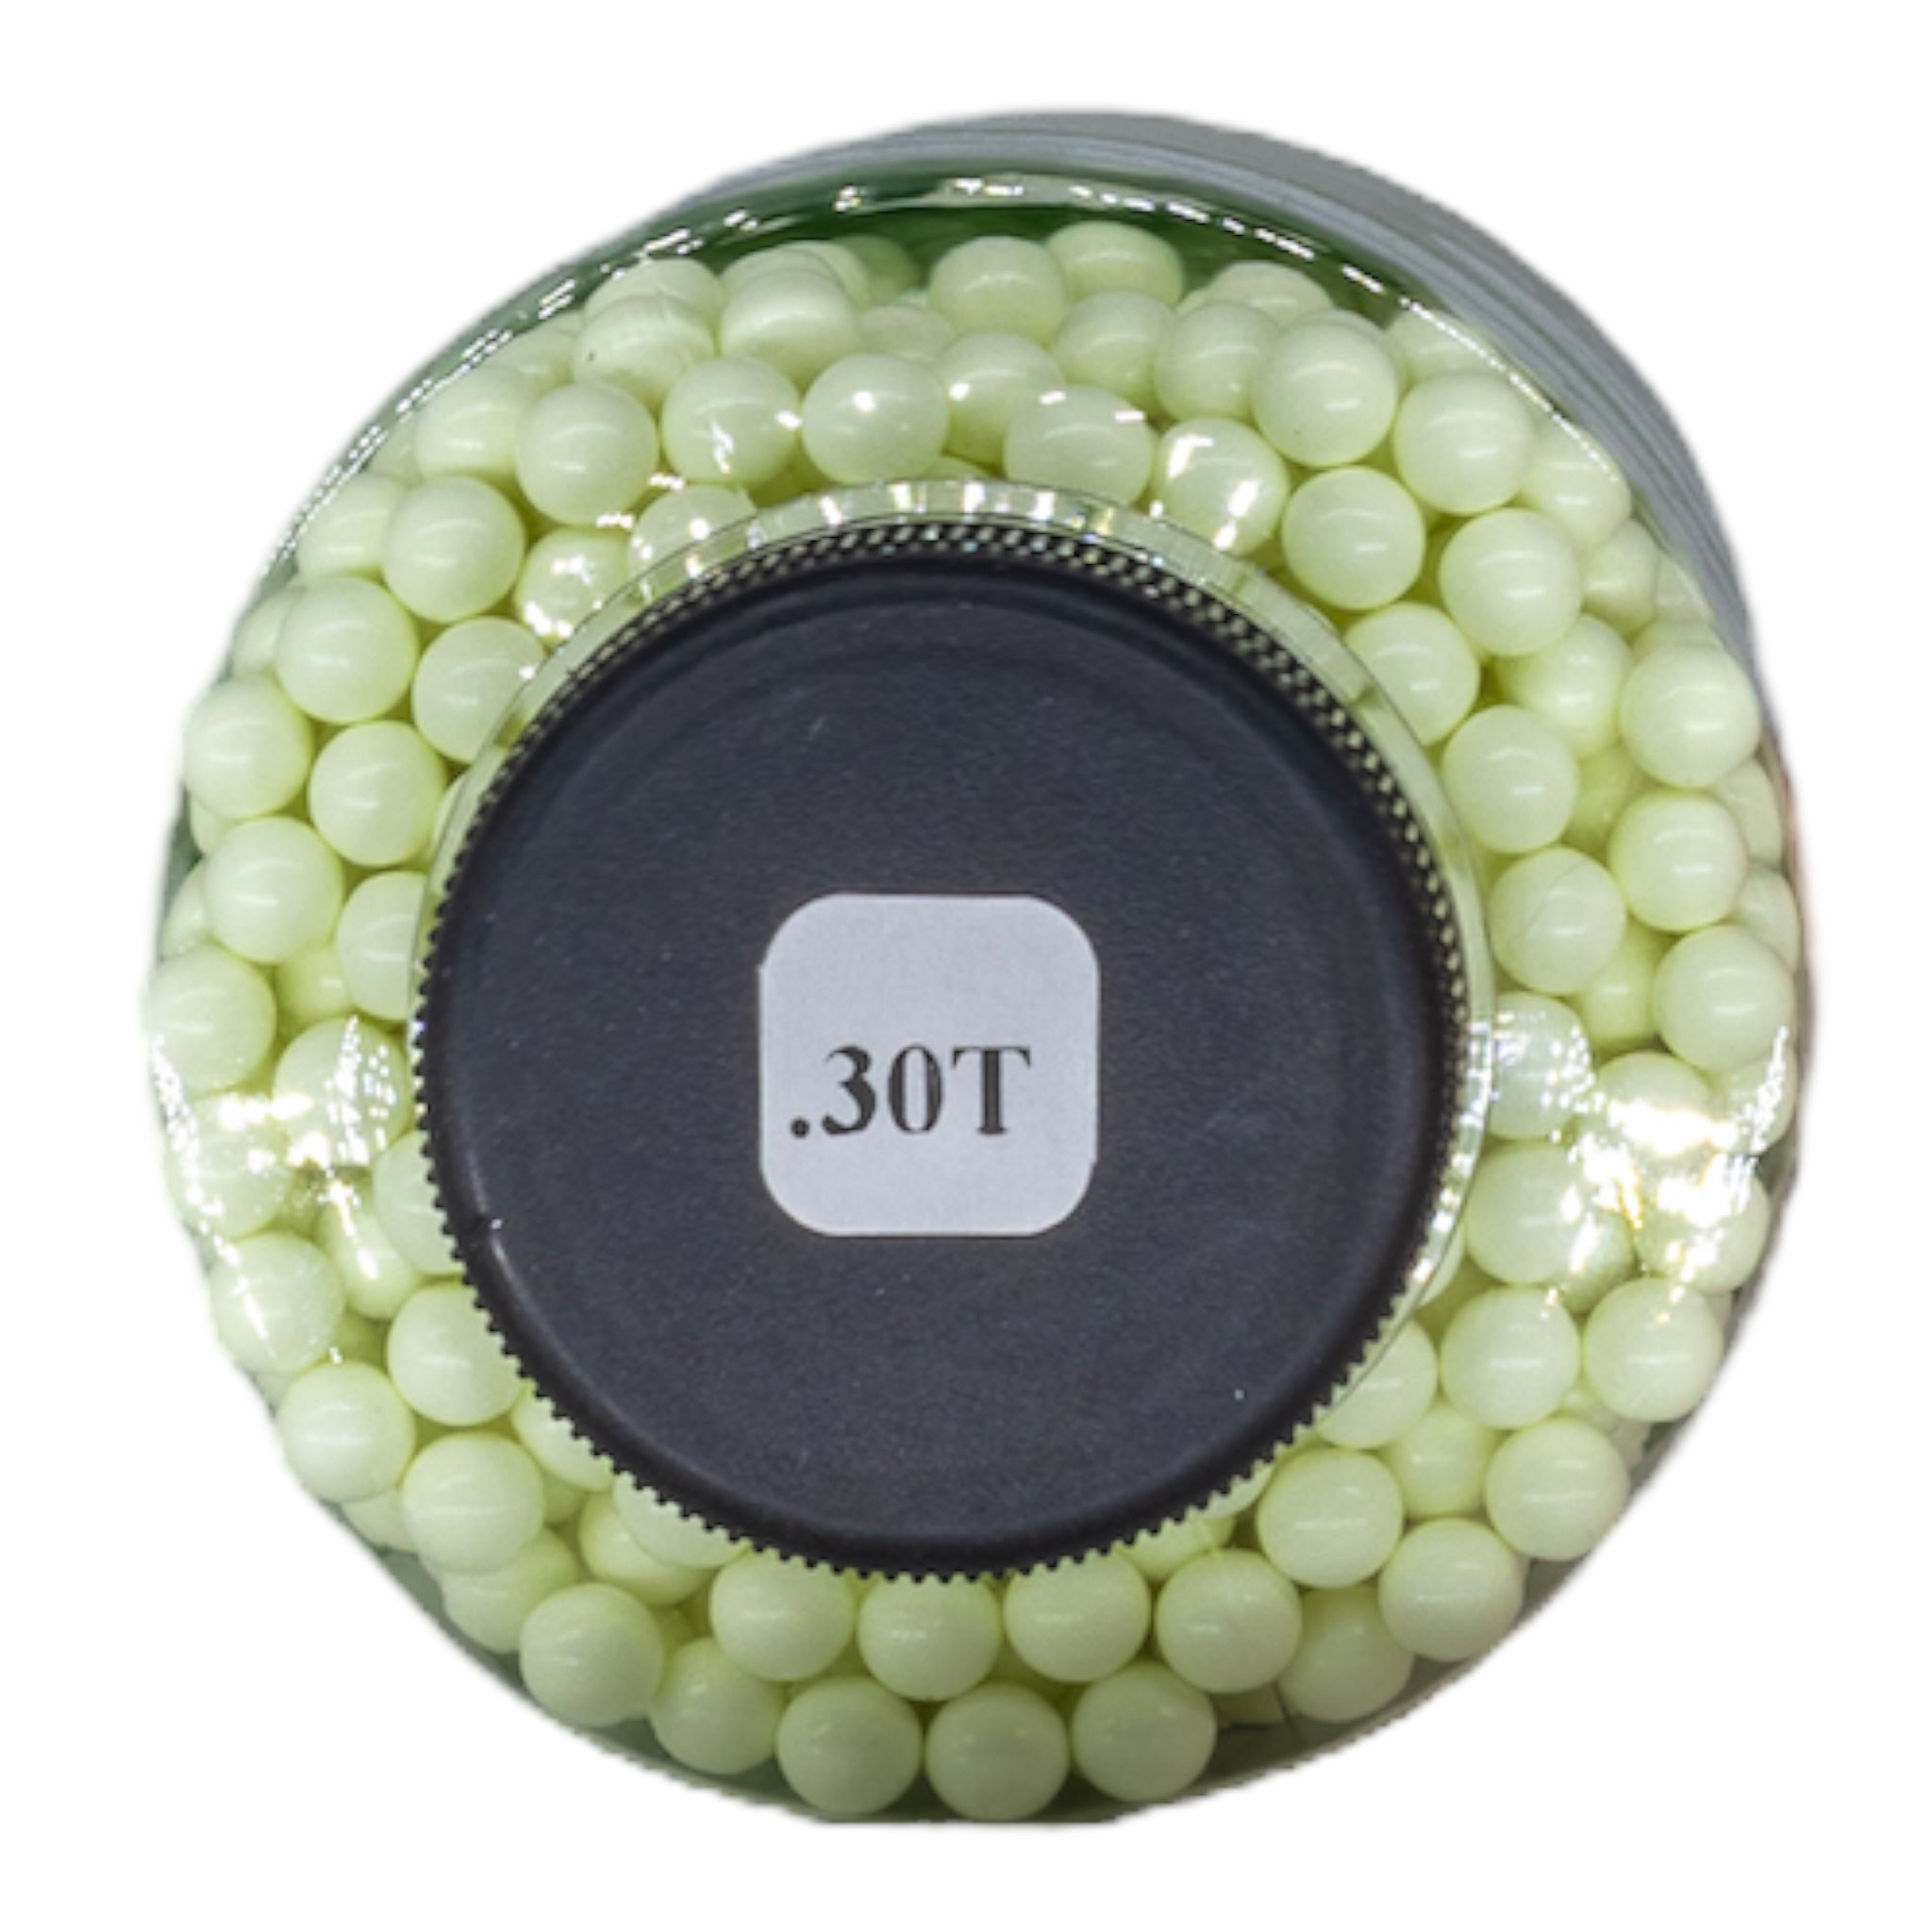 HPA 6mm 3300 Count Biodegradable Tracer BB's 0.30g (Green) - ssairsoft.com